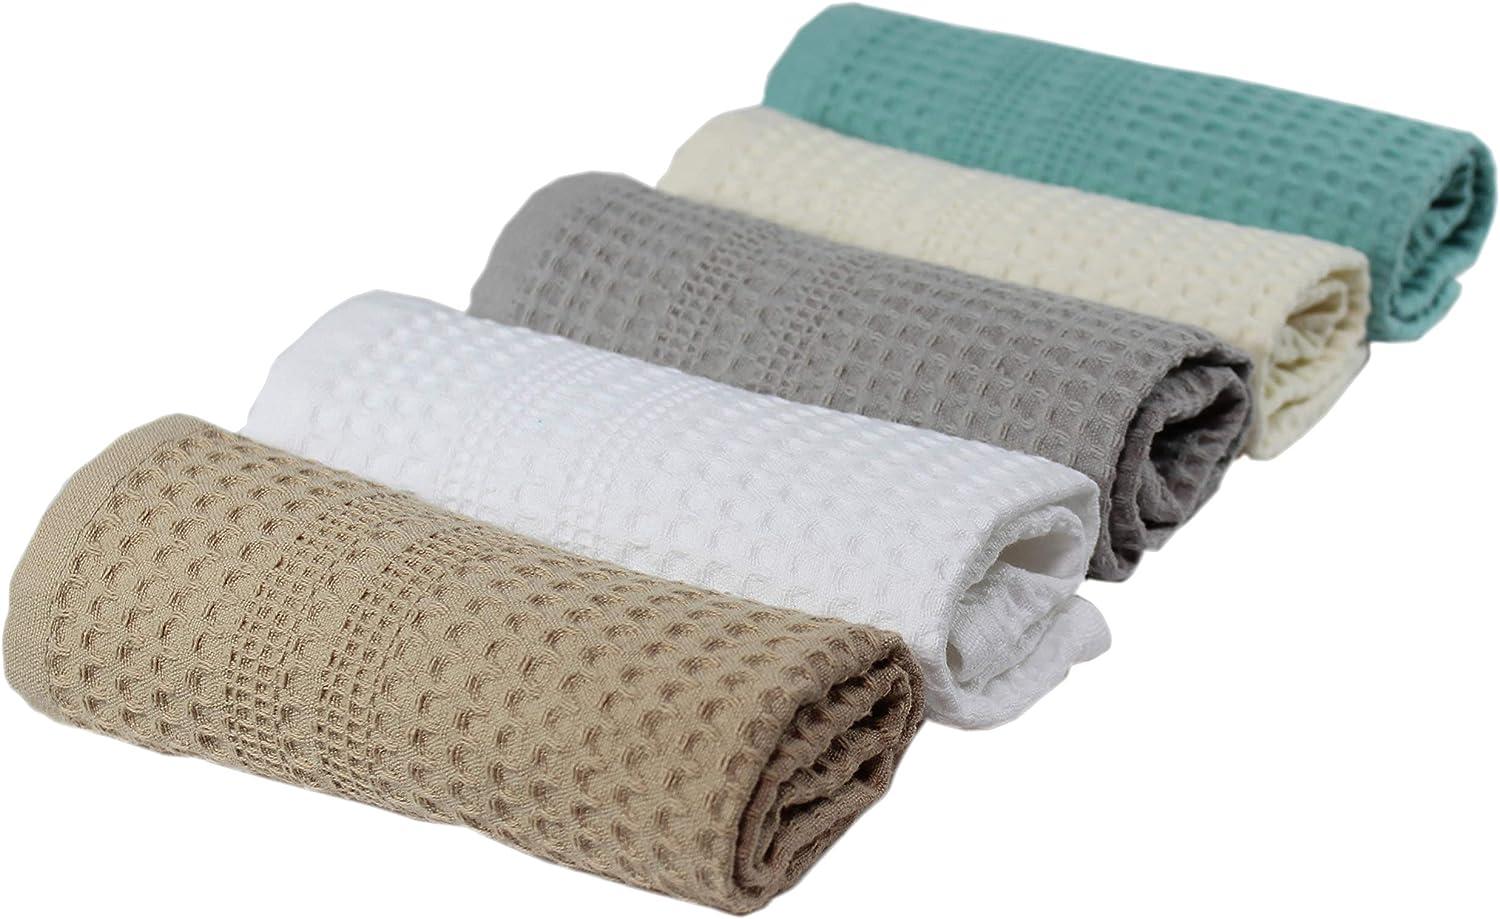 GILDEN TREE Waffle Towel Quick Dry Thin Exfoliating, 4 Pack